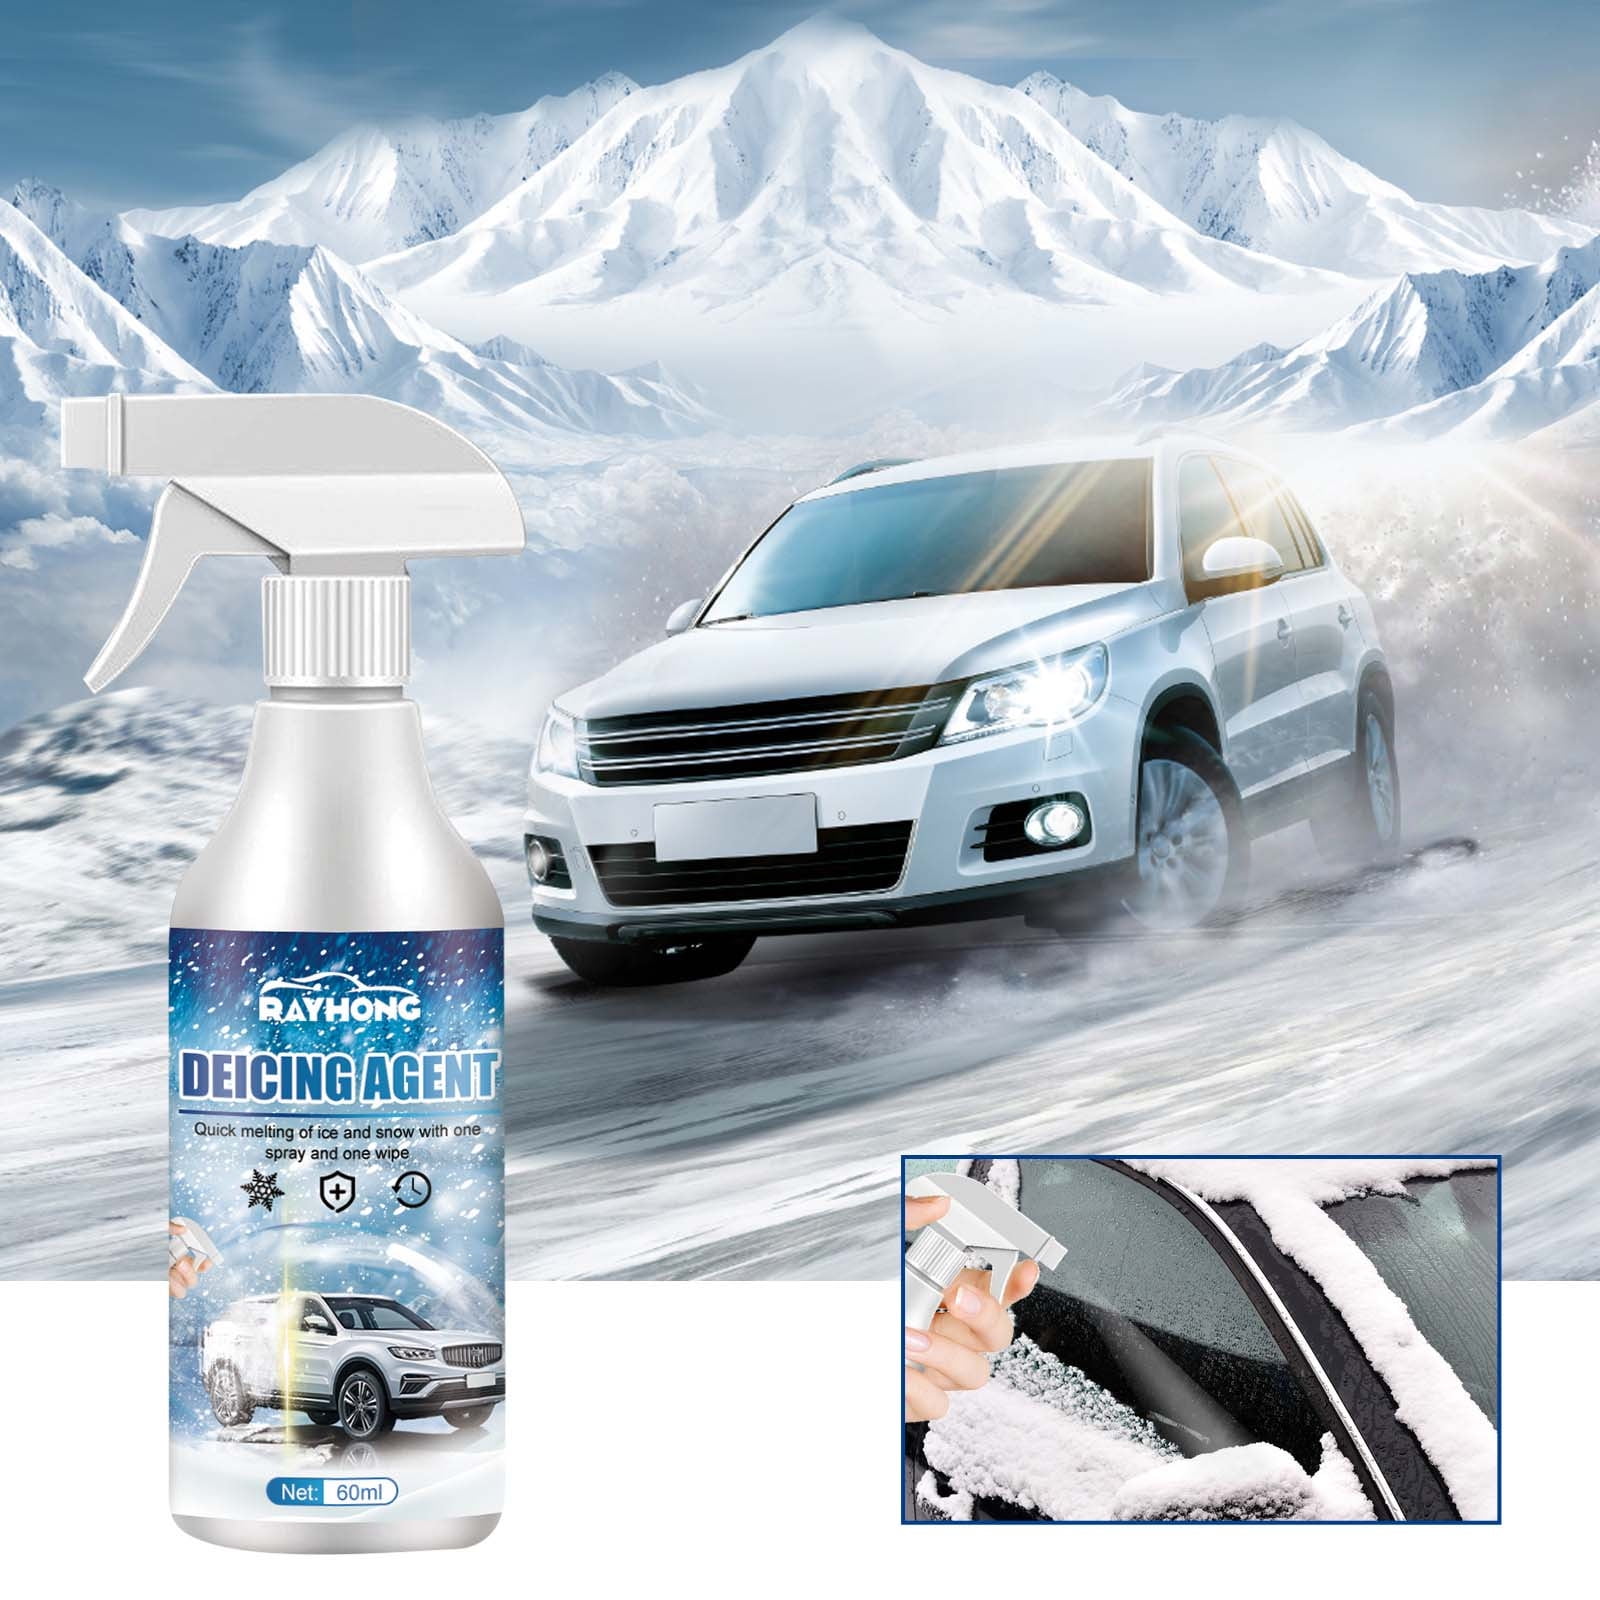 XEOVHV Deicer Spray for Car Windshield, De-Icer for Car Windshield,Fast Ice  Melting and Snow Remover for Winter Car Glass 60ml/3.1oz 